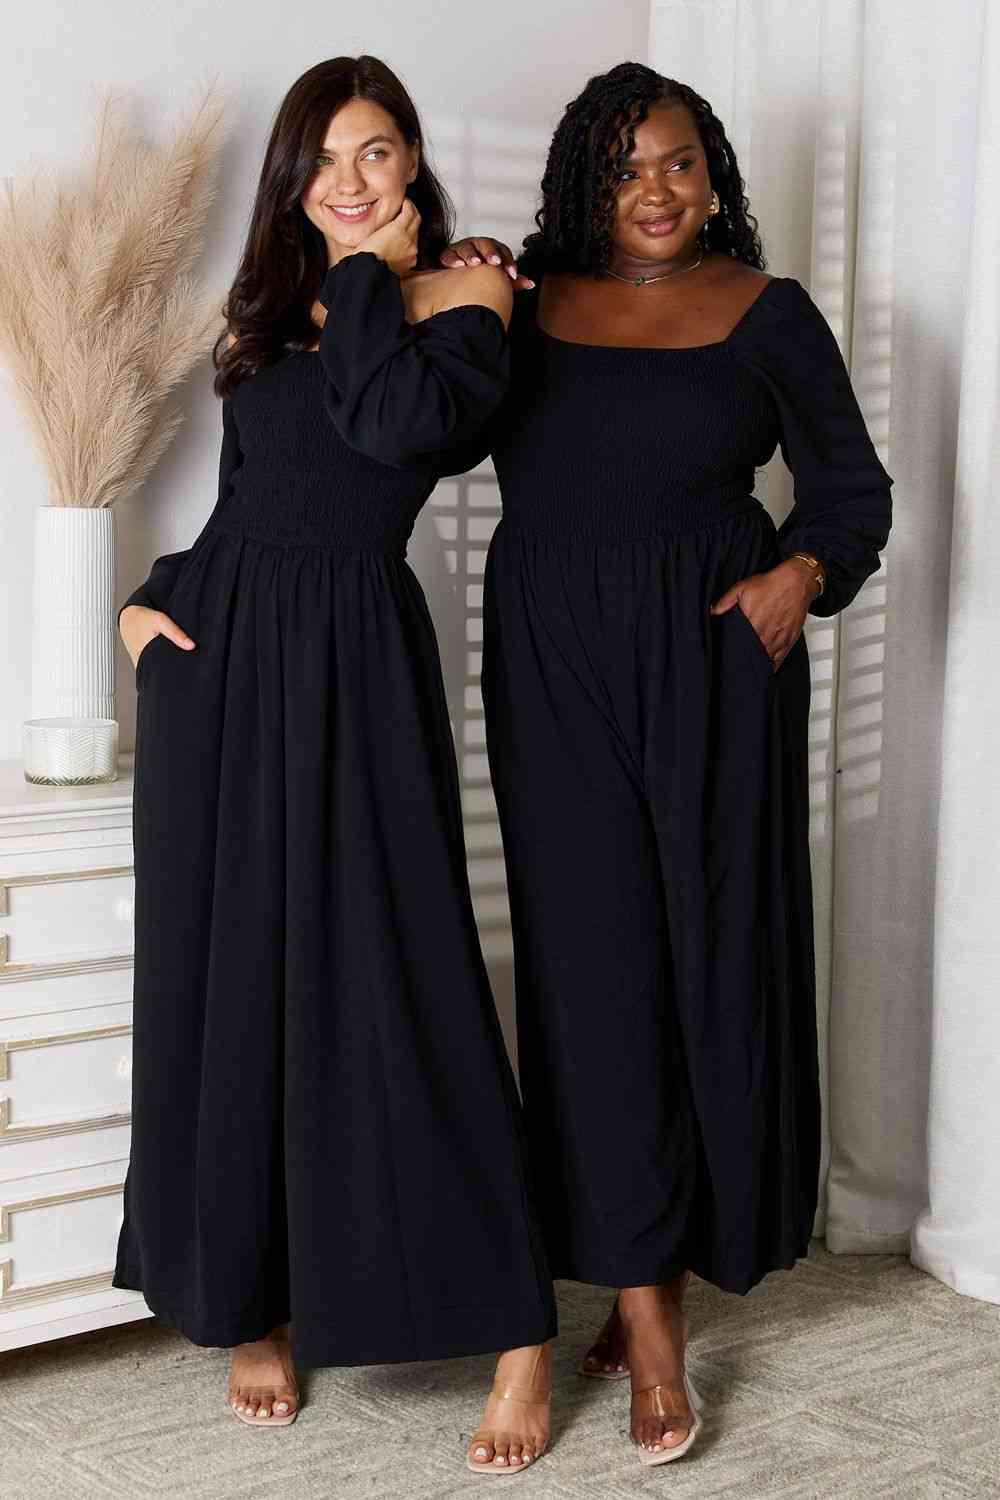 Double Take Square Neck Jumpsuit with Pockets -  - Wild Willows Boutique - Massapequa, NY, affordable and fashionable clothing for women of all ages. Bottoms, tops, dresses, intimates, outerwear, sweater, shoes, accessories, jewelry, active wear, and more // Wild Willow Boutique.